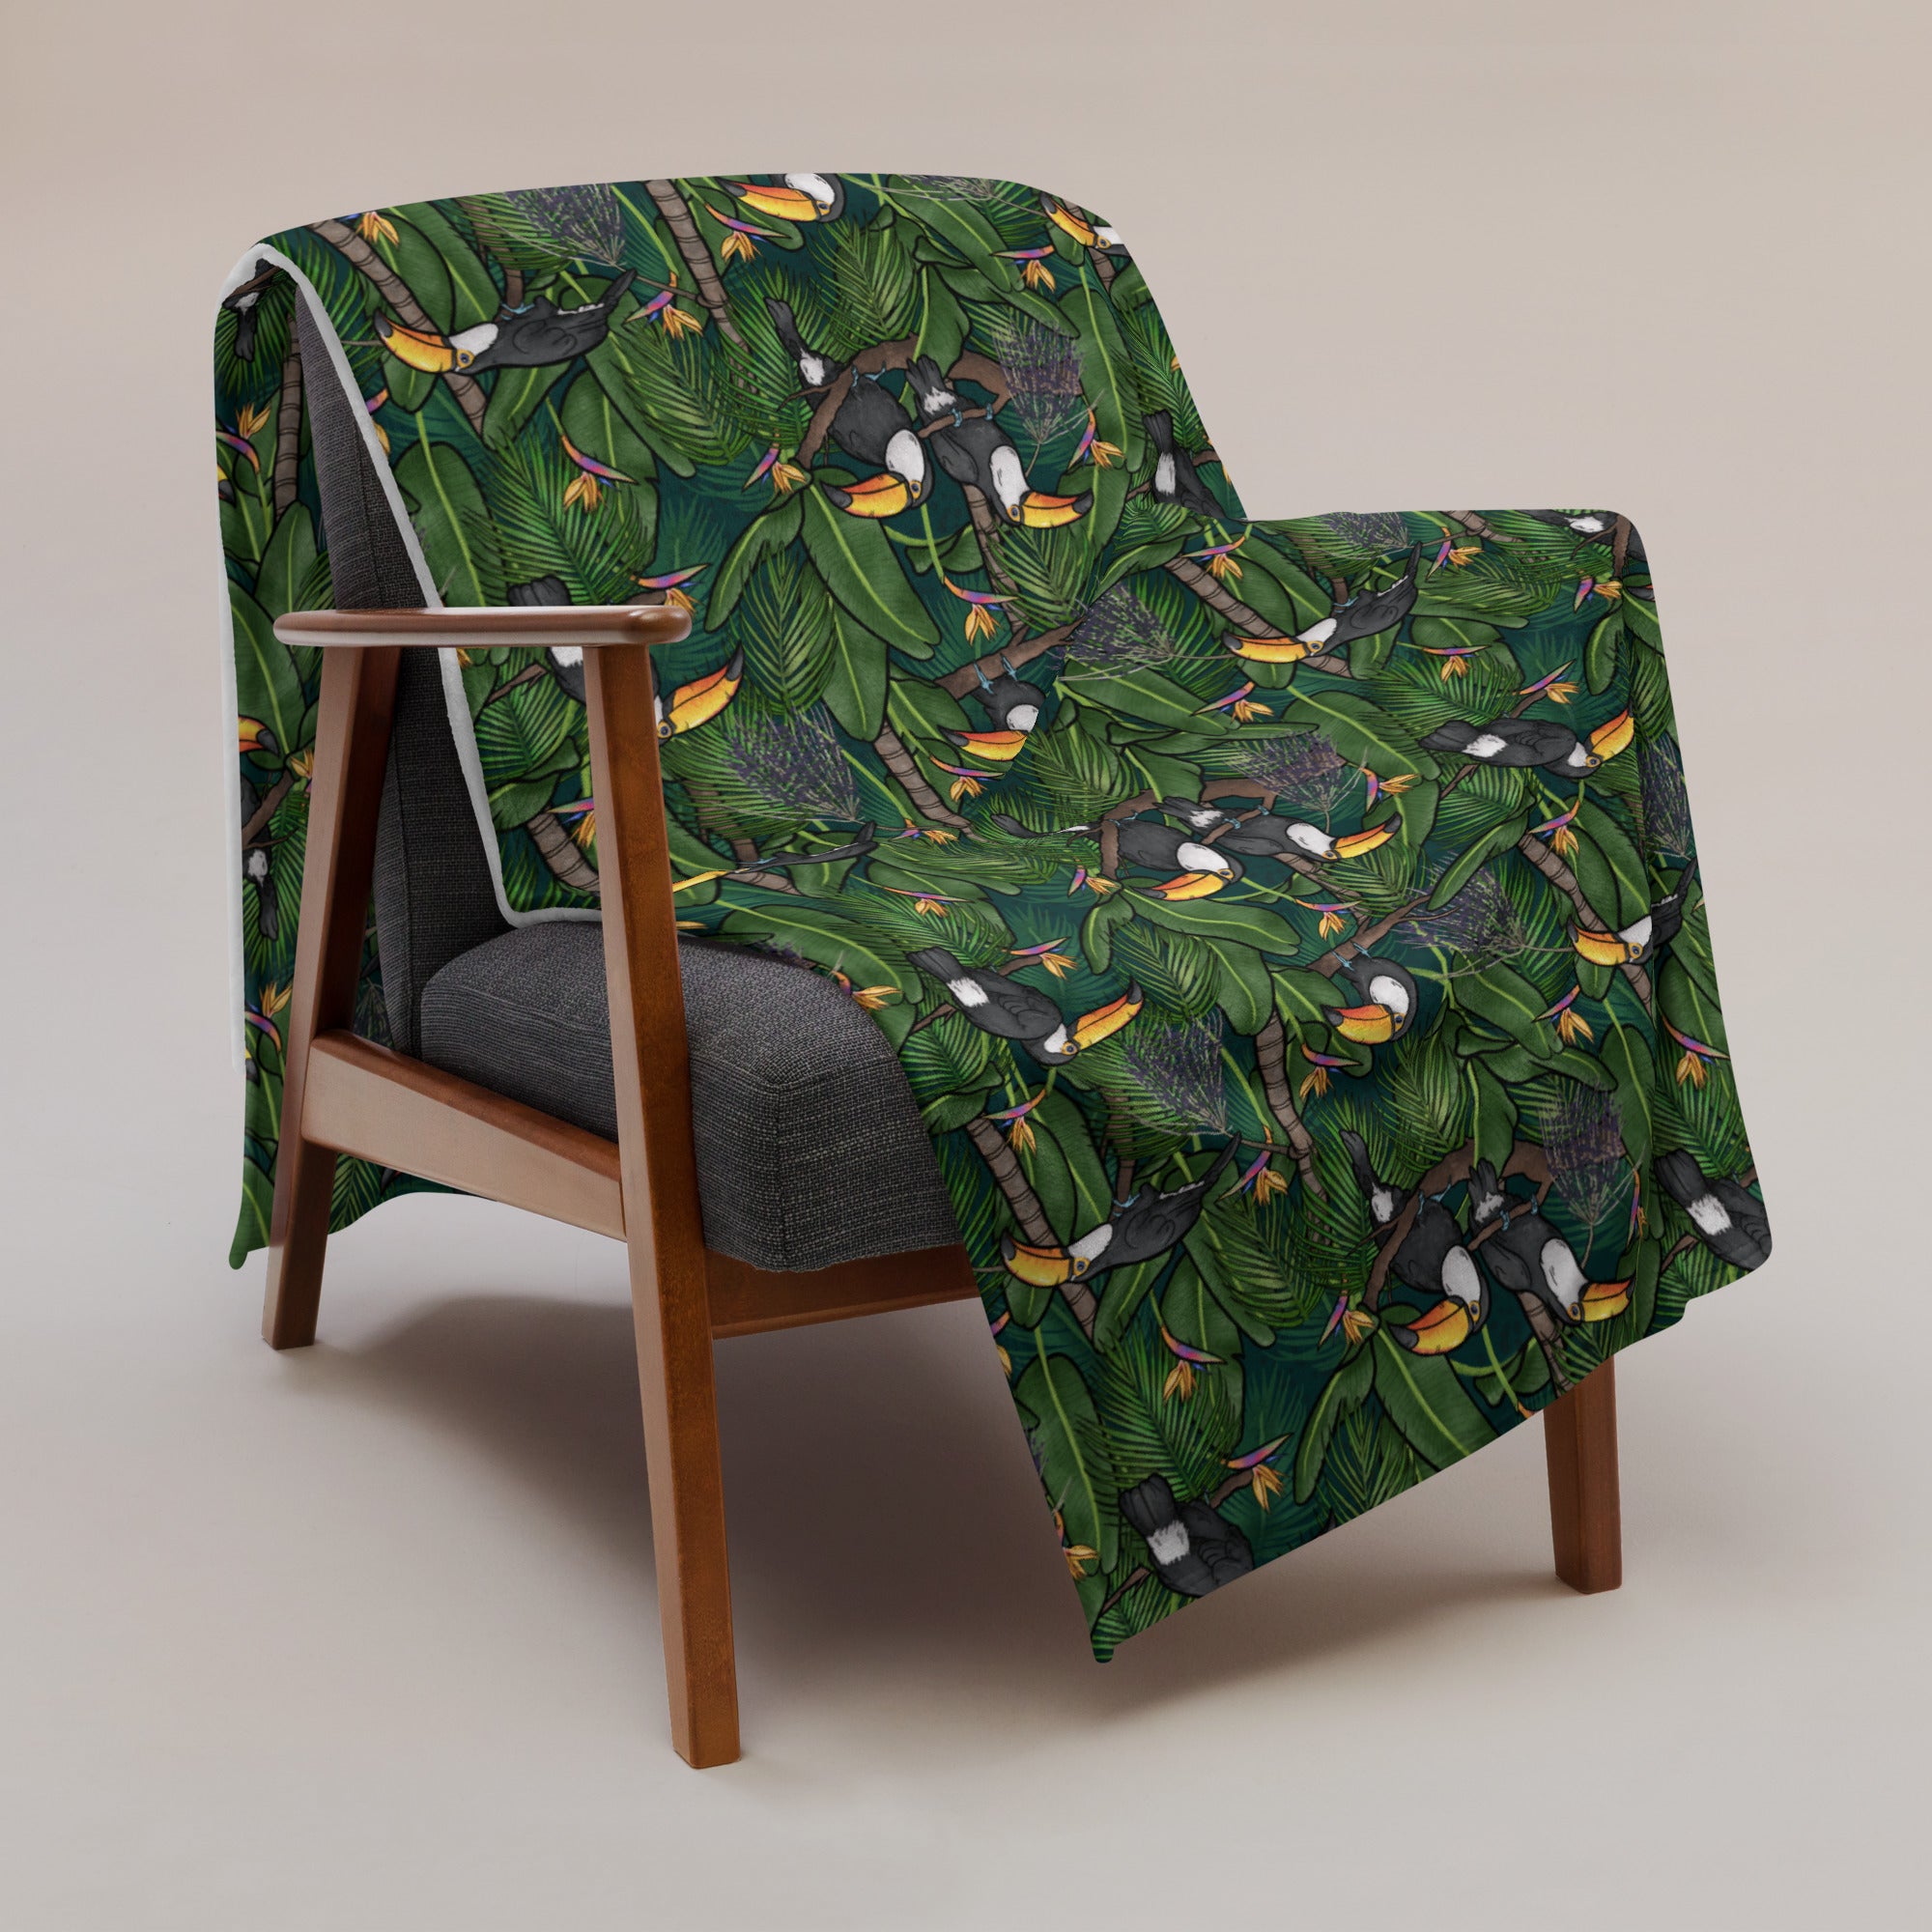 image of 60" x 80" Toucans in the jungle pattern blanket draped over a chair